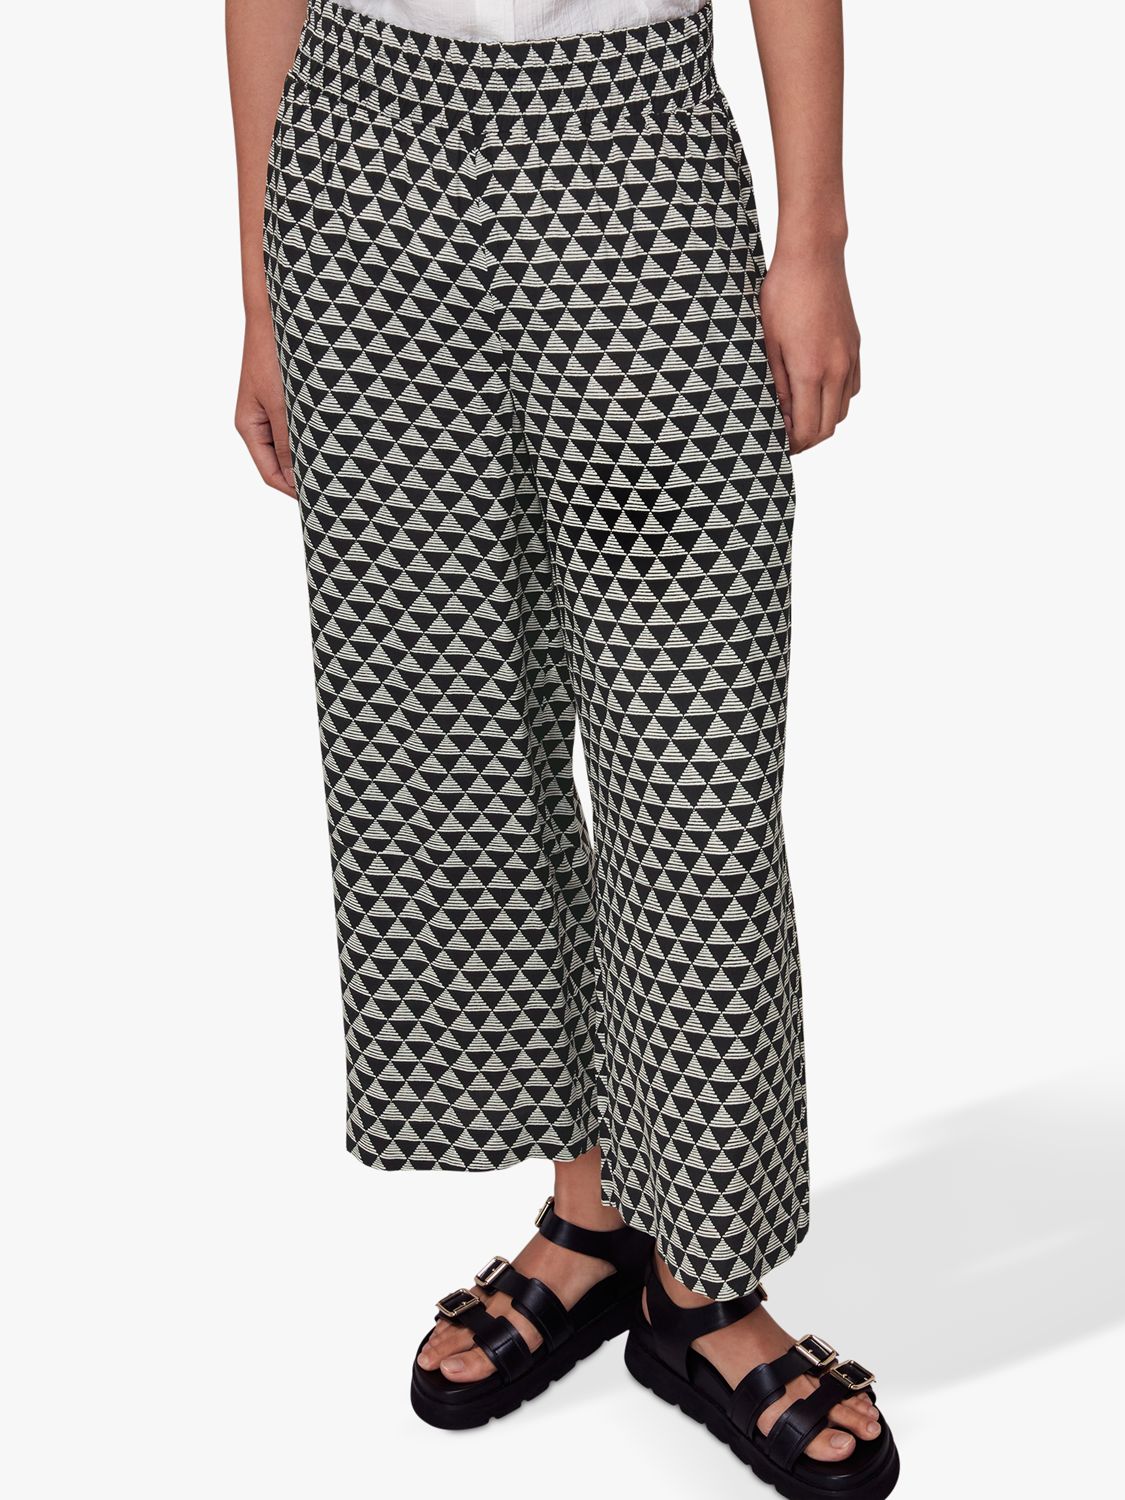 Whistles Checkerboard Wide Trousers, Black/Multi, 6